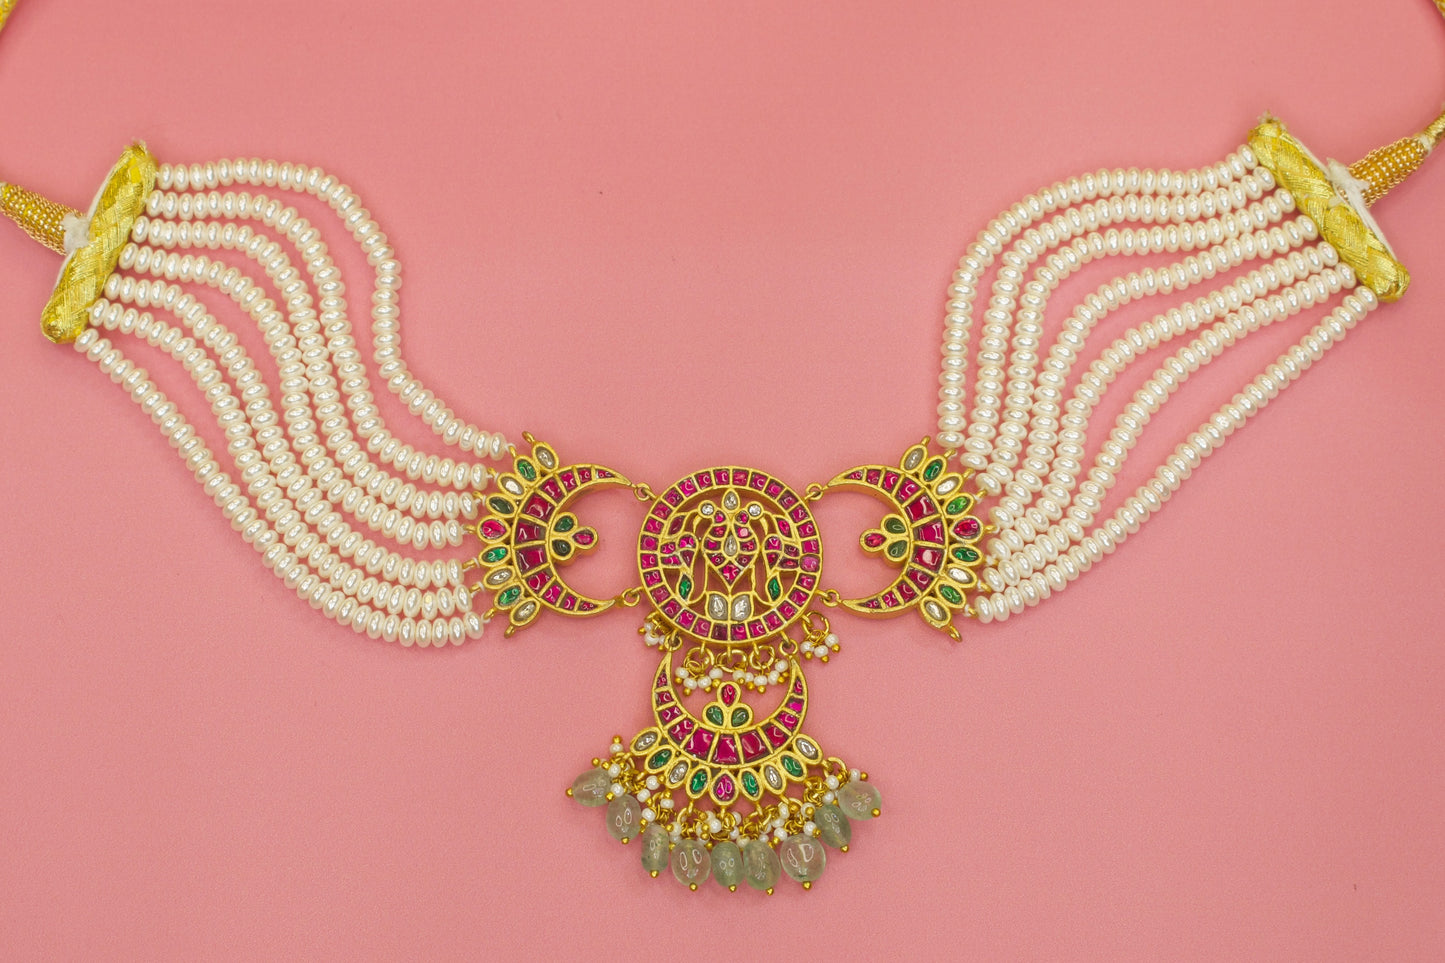 Heavenly Jadau setting Kundan Choker with uncut ruby and emerald gemstones, rice pearls, and beads! This traditional jewellery is apt for wedding and festive occasions!